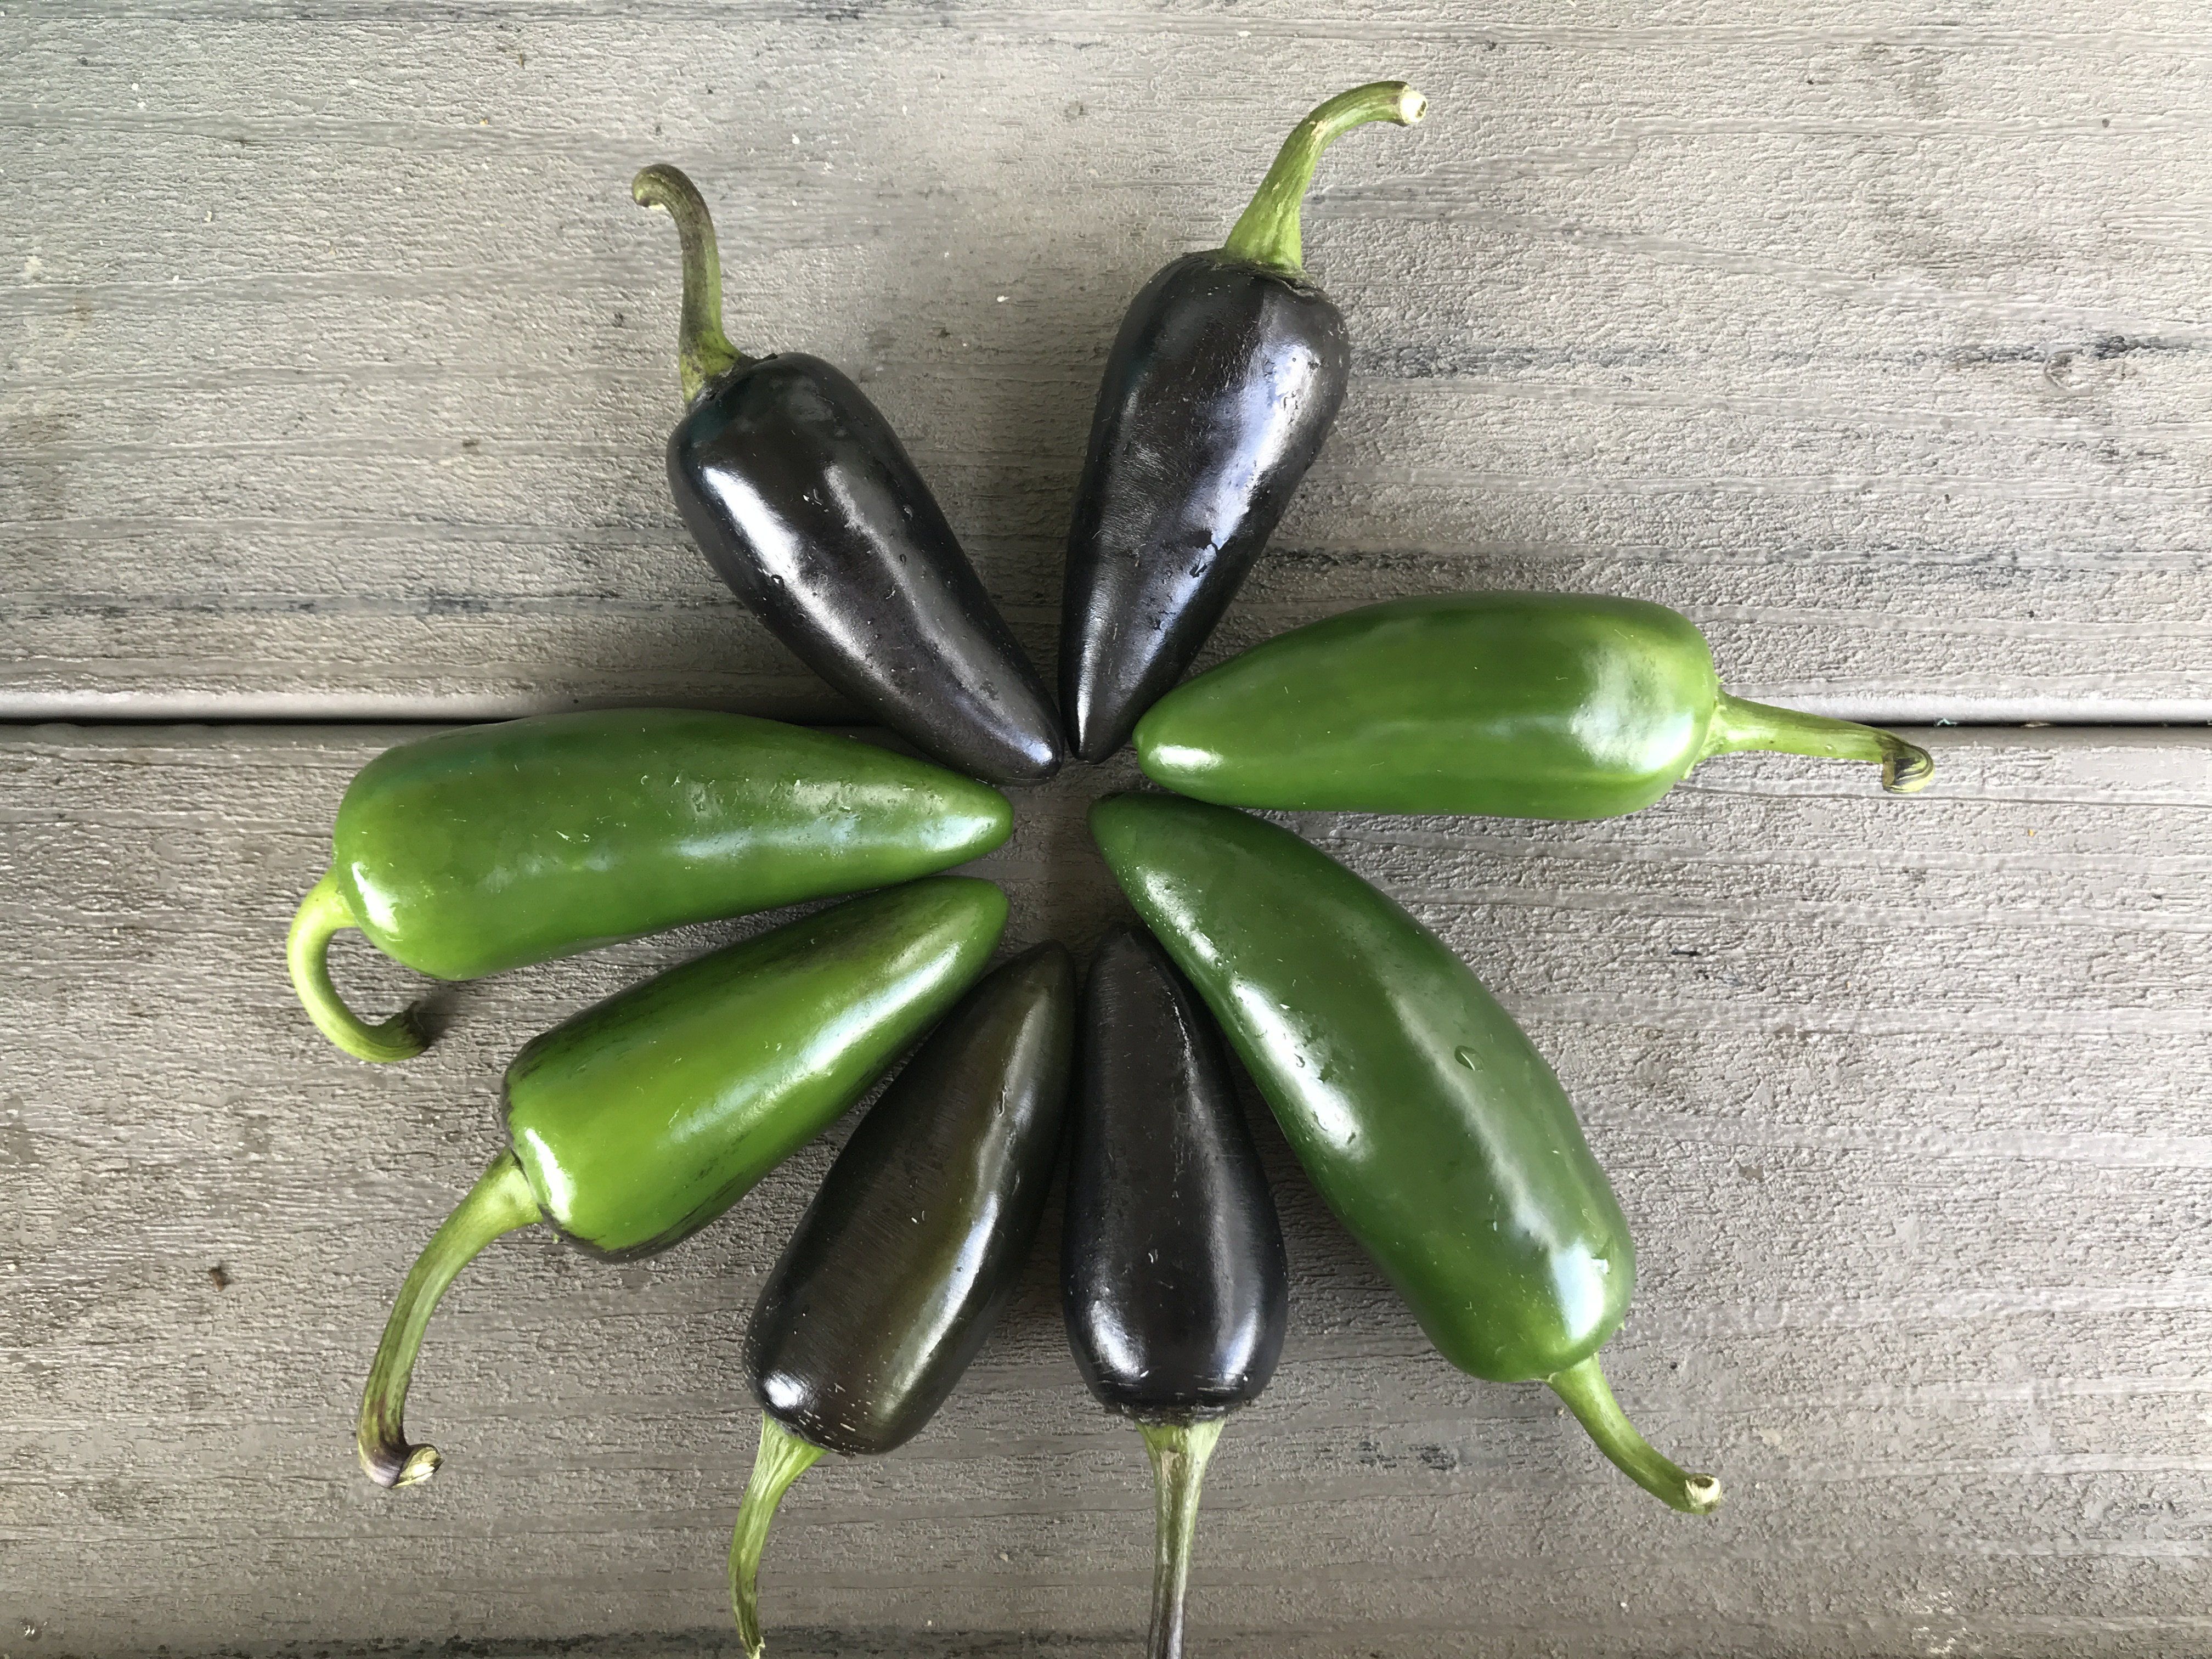 Previous Happening: Six Ideas to Use Hot Peppers